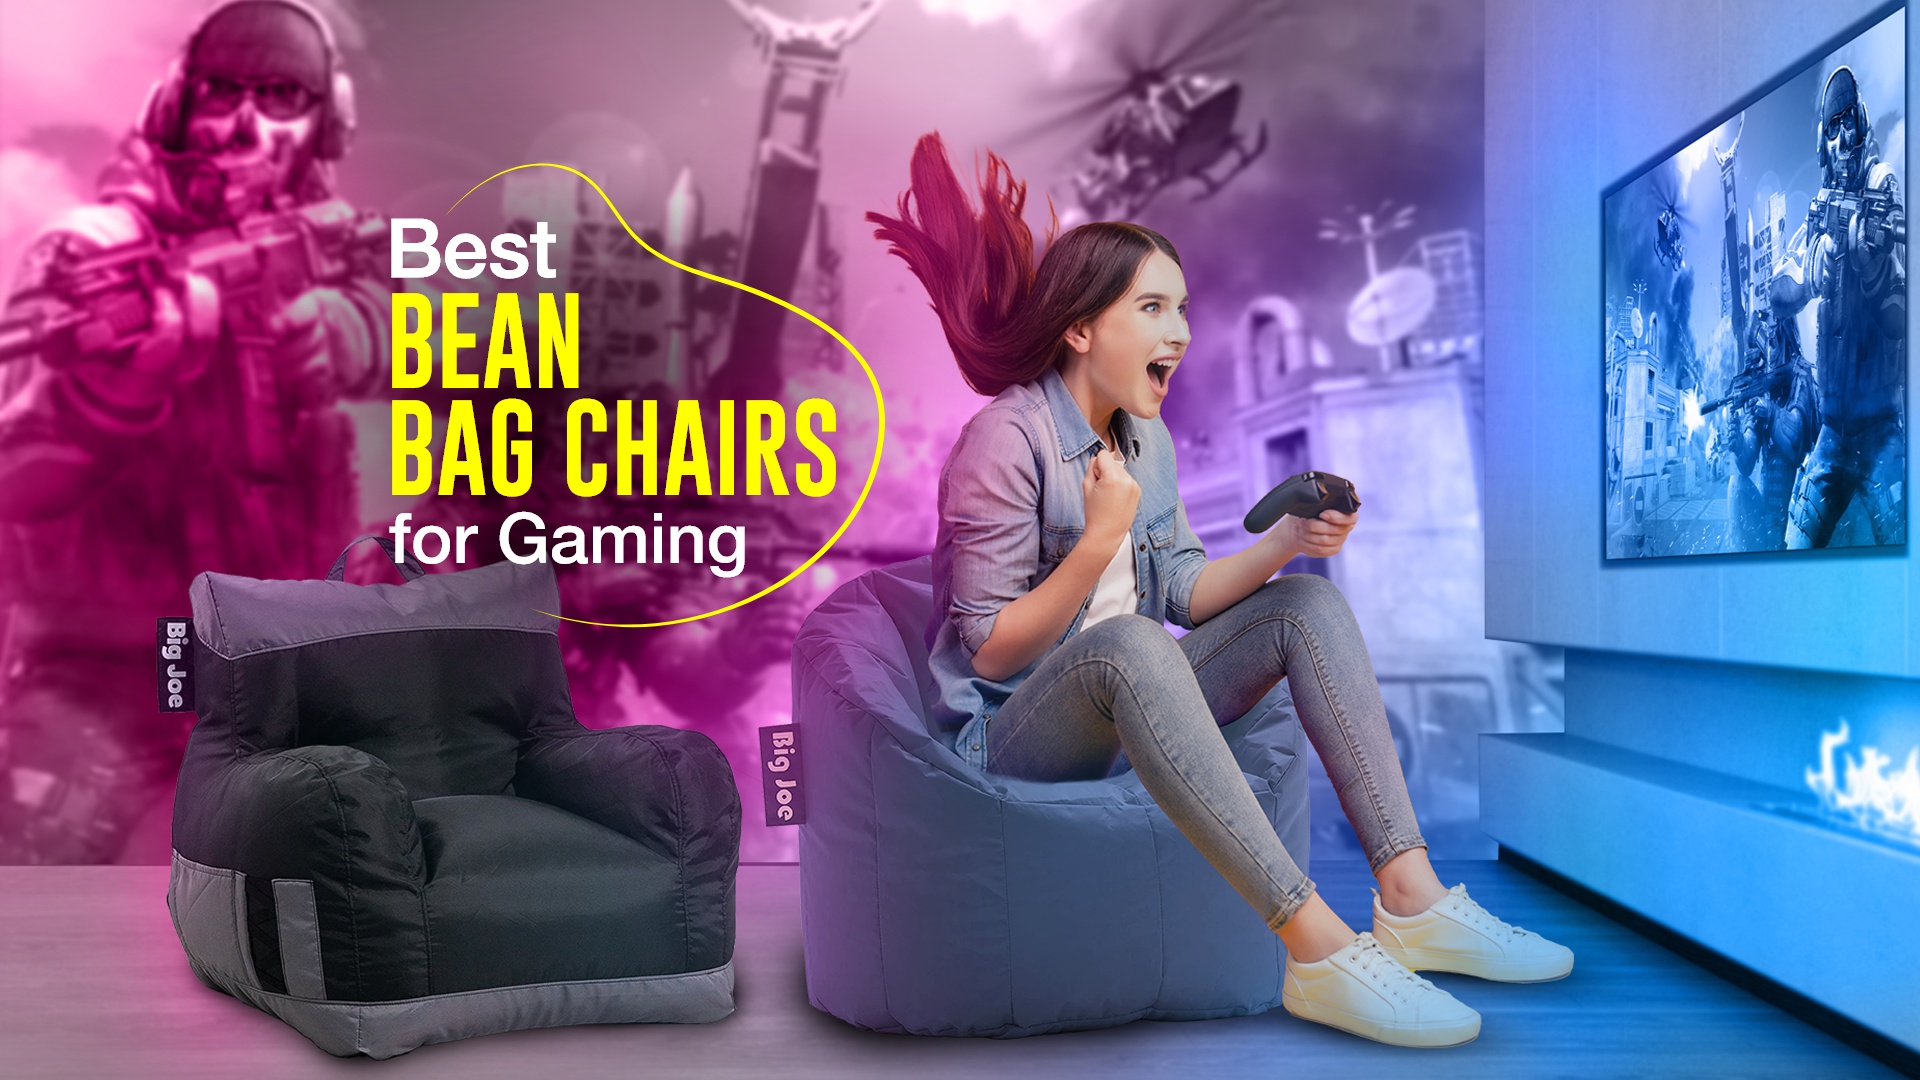 Best Bean Bag Chairs for Gaming